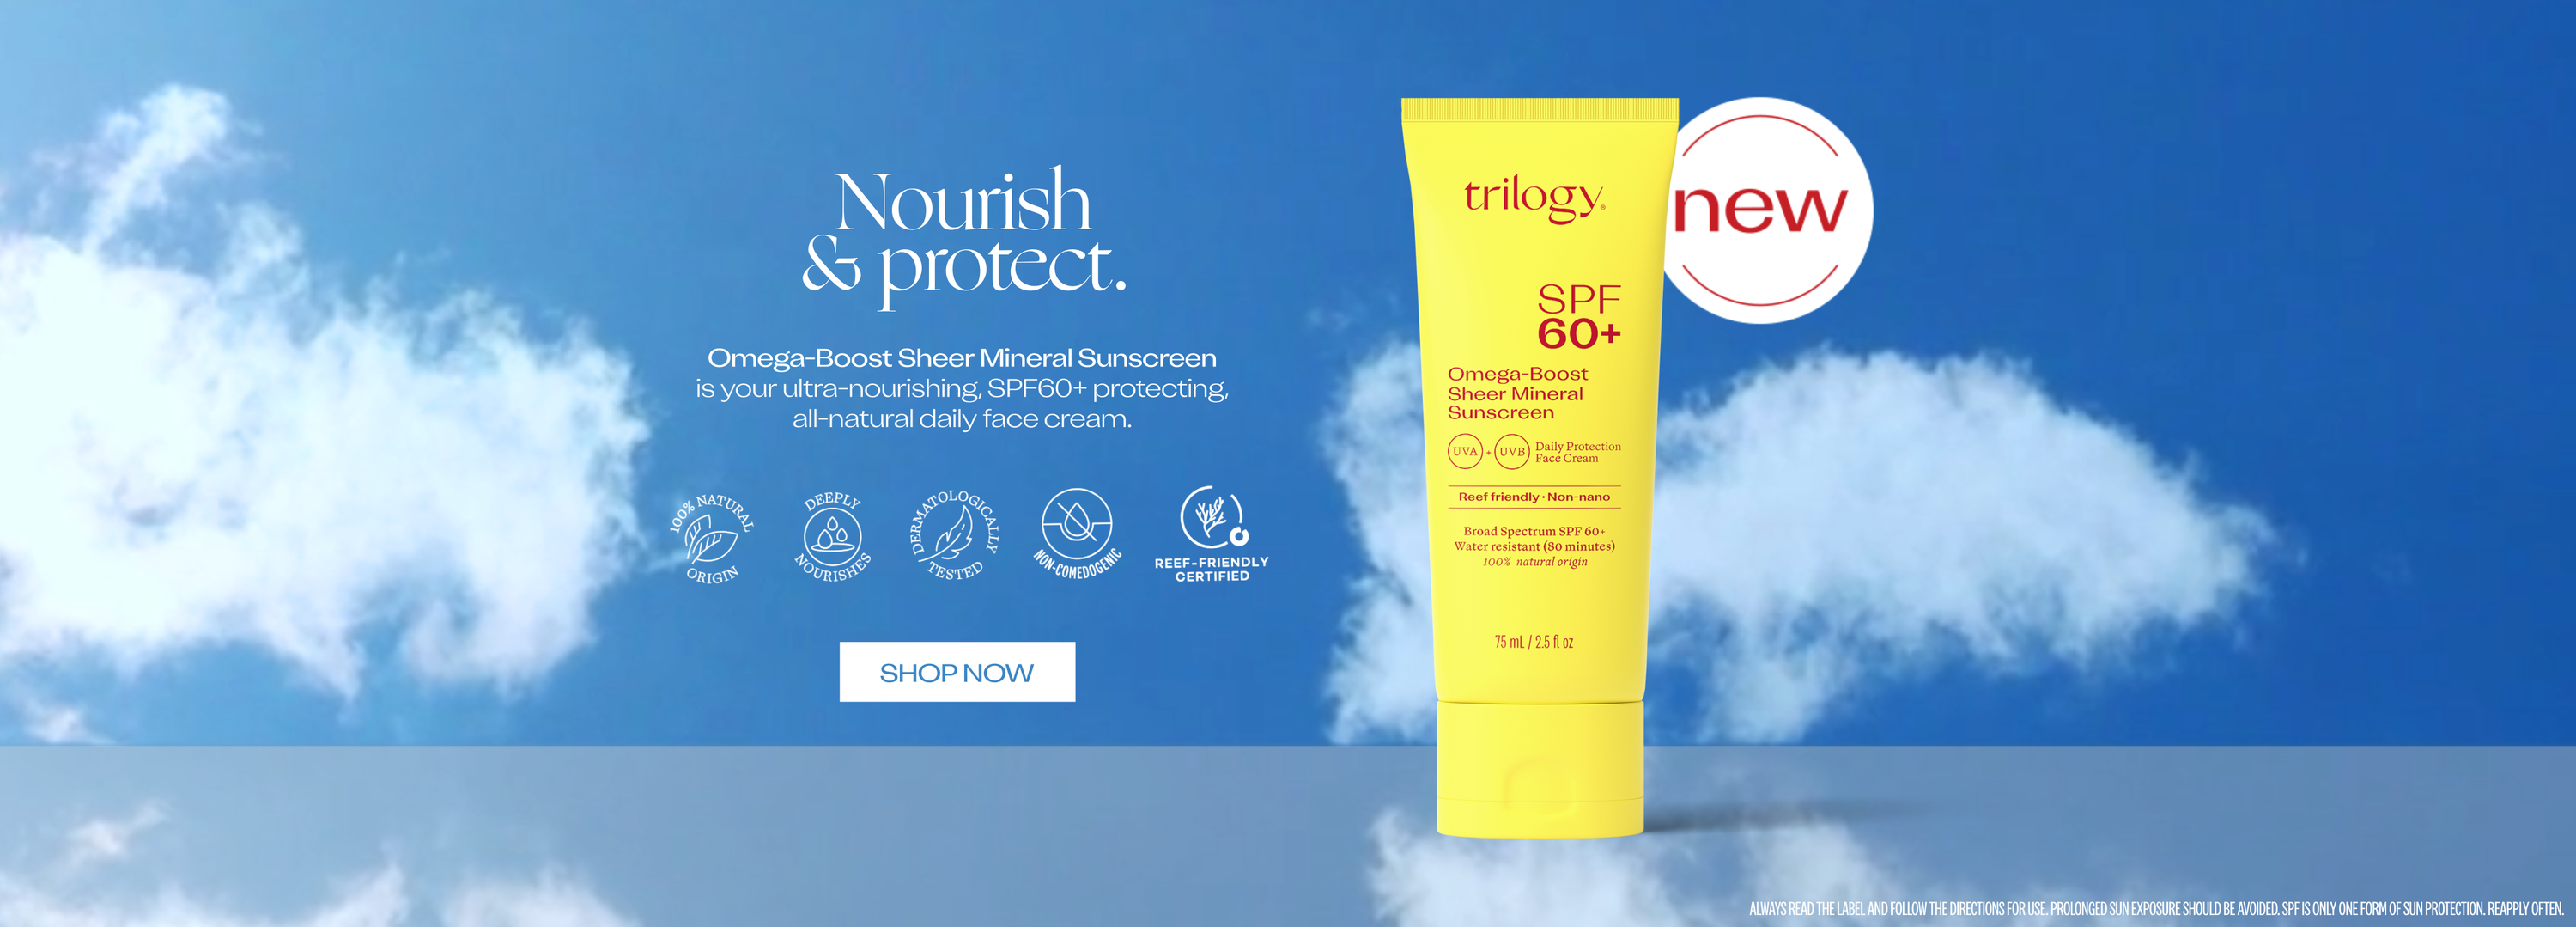 NEW SPF60+ Omega-Boost Sheer Mineral Sunscreen